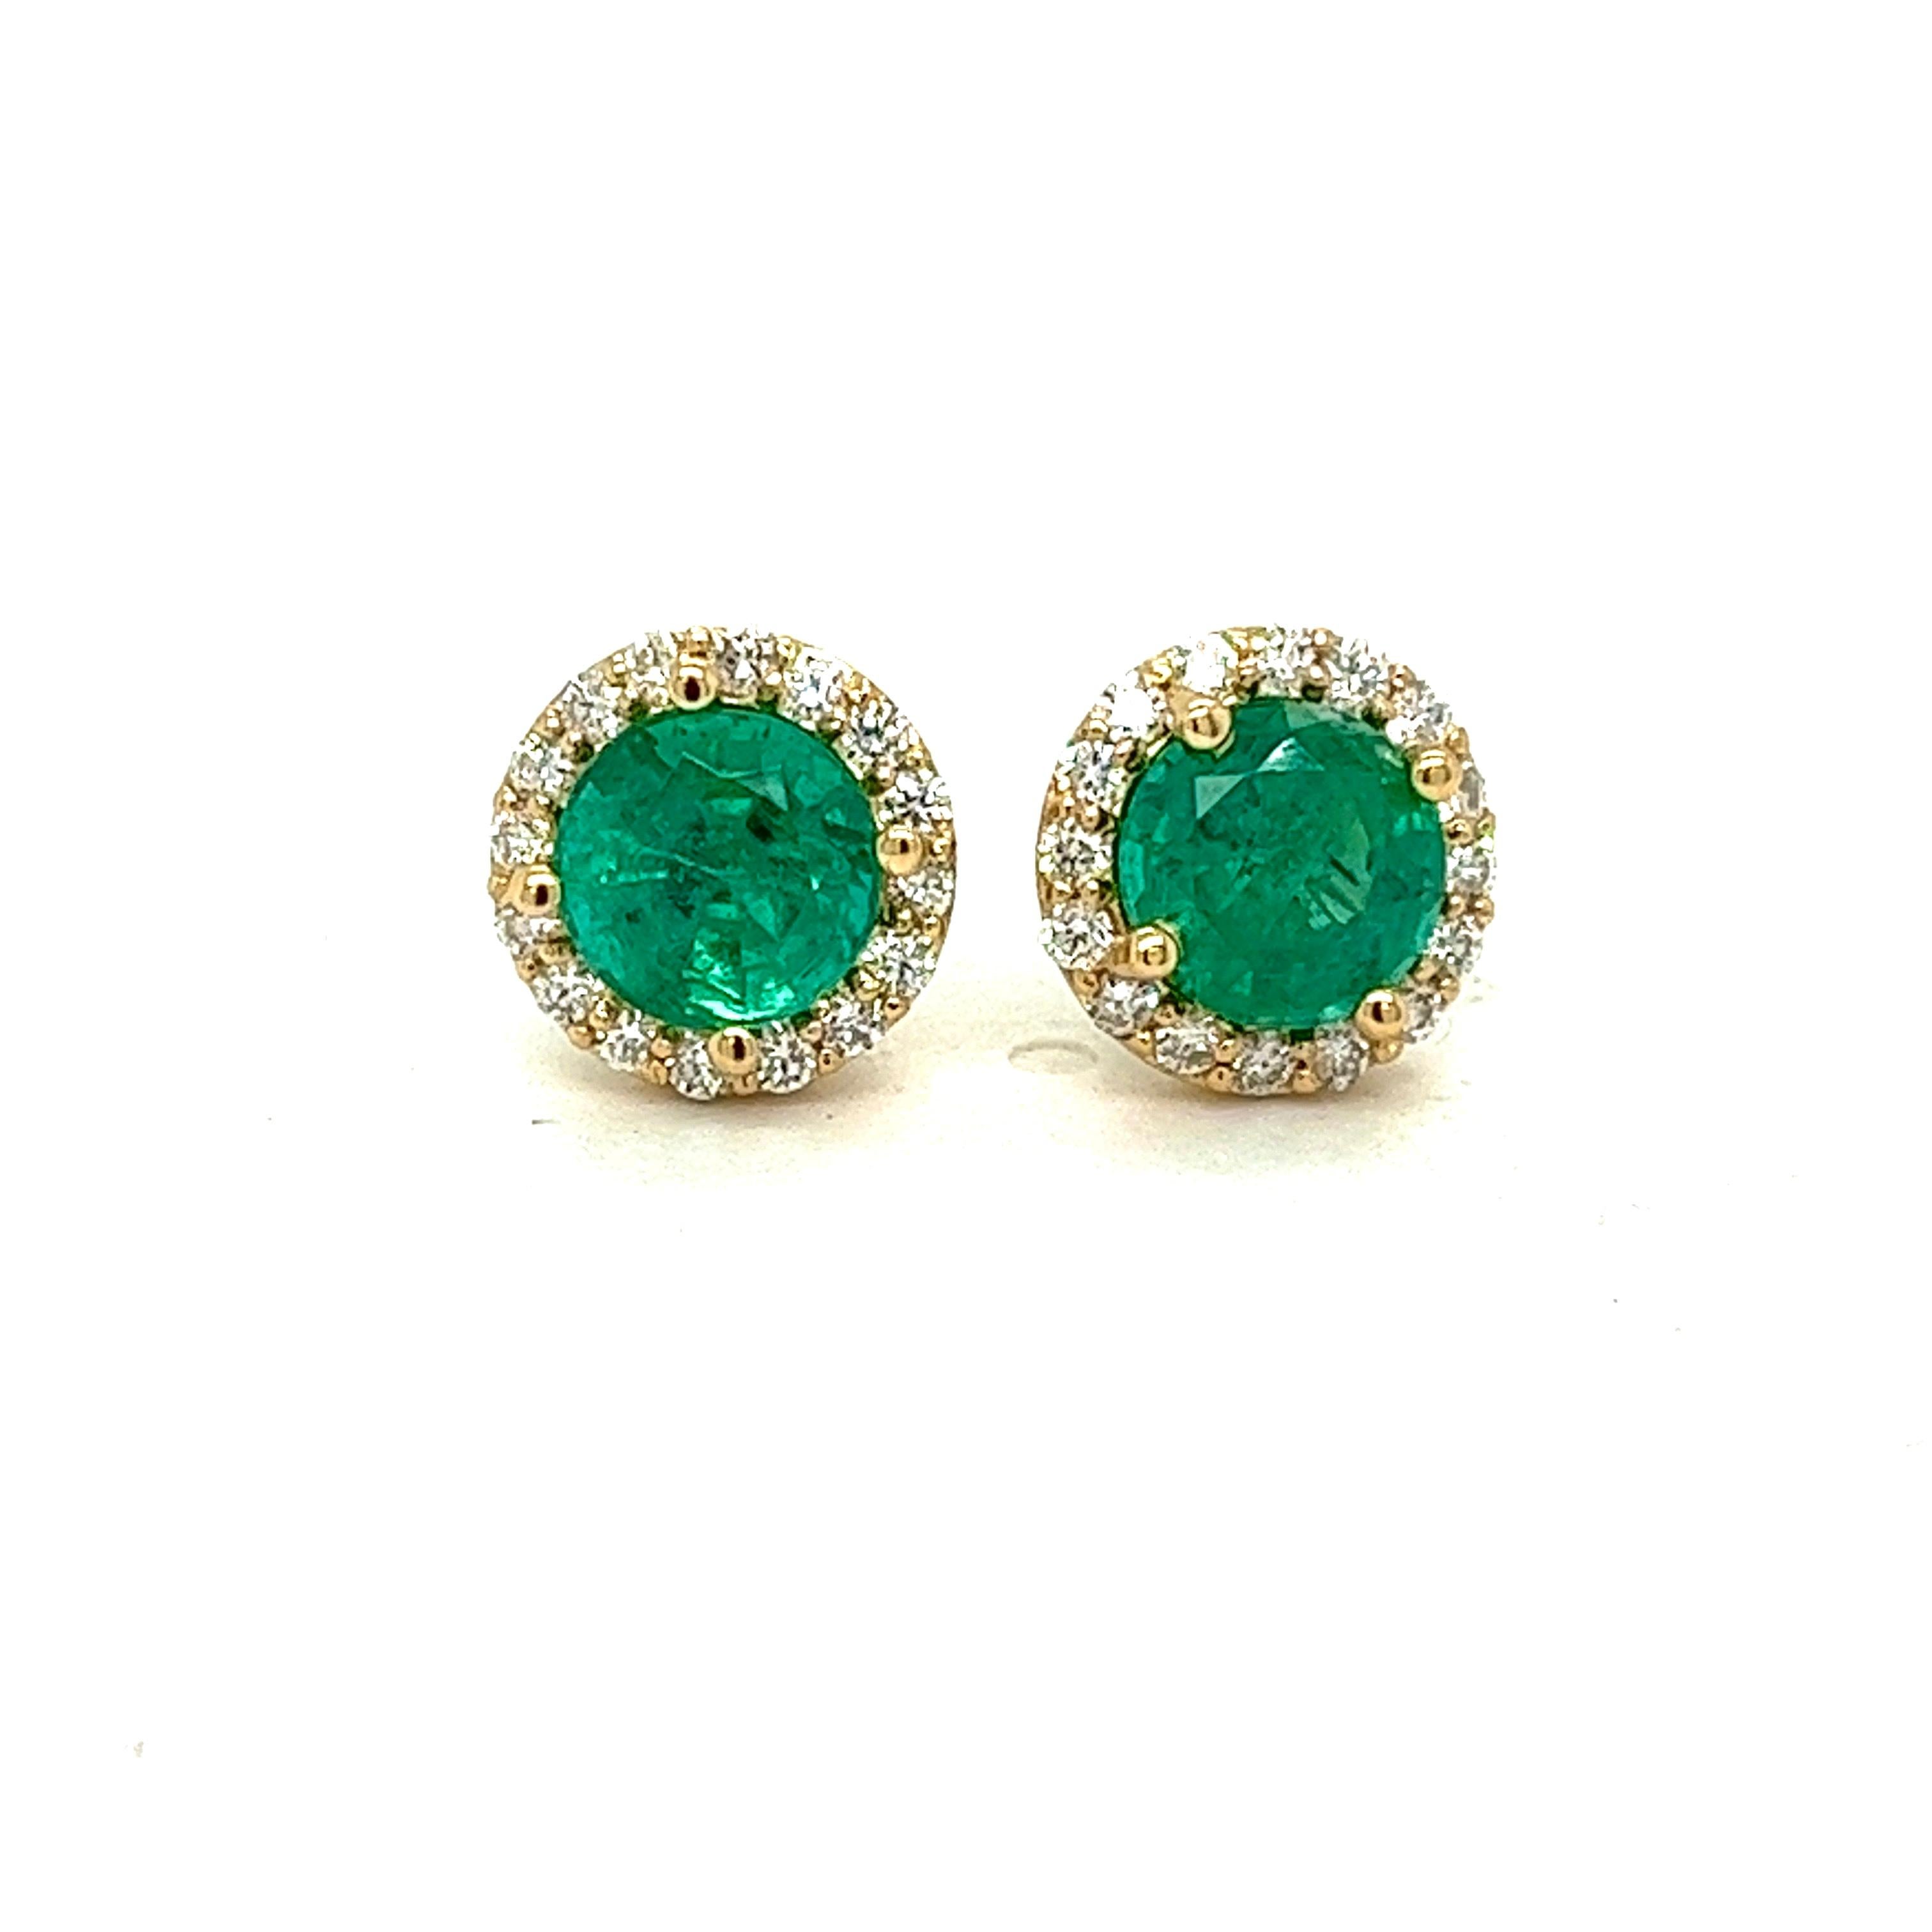 Experience sheer opulence with our exquisite Natural Green Emerald Halo Earrings. 
This captivating pair showcases two 7mm round emeralds, totaling an impressive 2.84 carats. with Zambian Providence.
Emeralds have natural inclusions, which are not